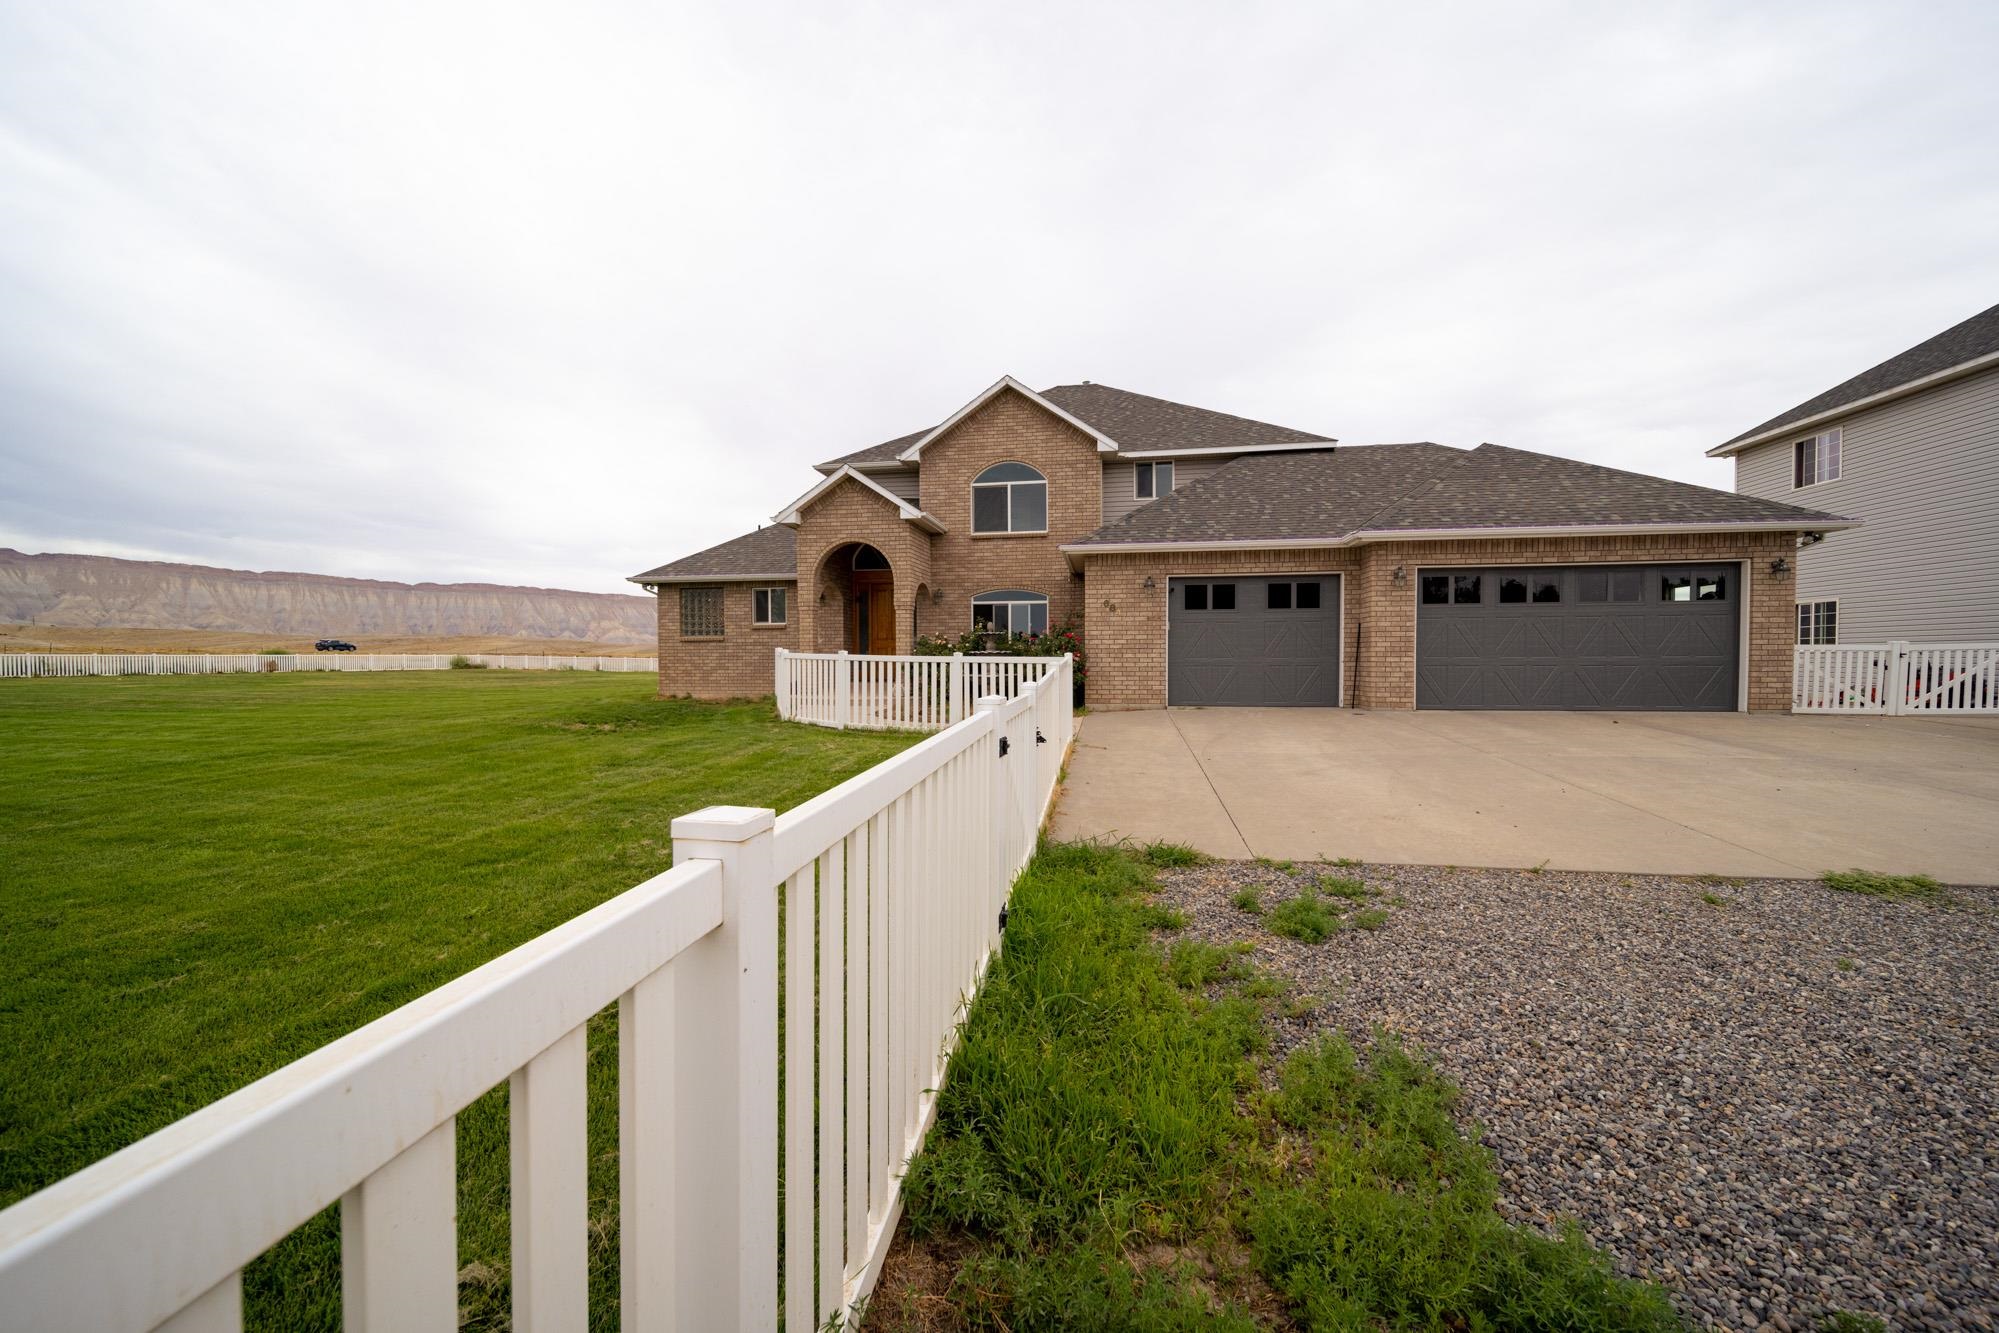 684 31 Road, Grand Junction, CO 81504